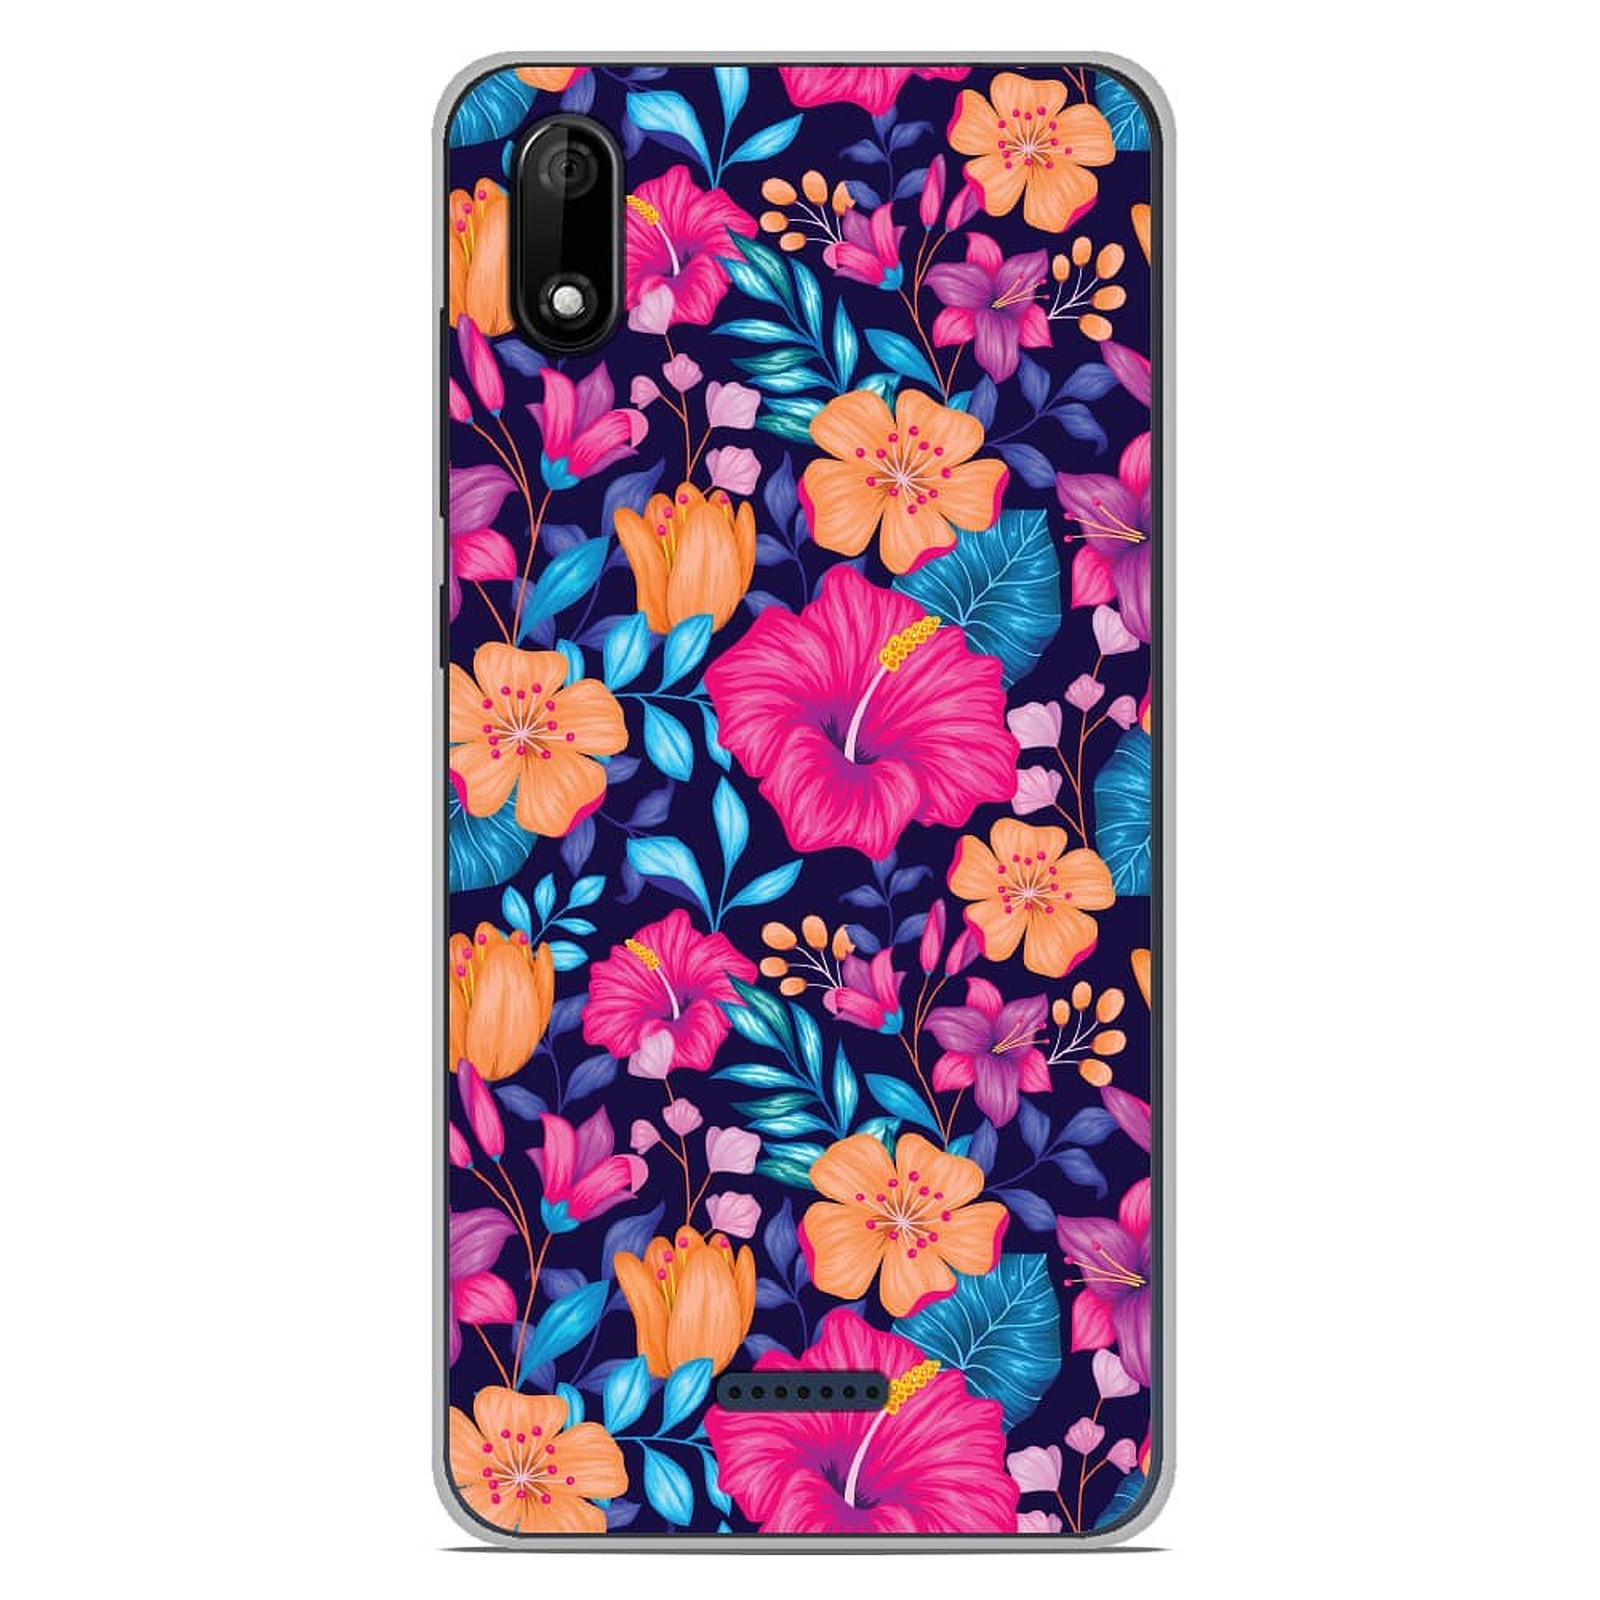 1001 Coques Coque silicone gel Wiko Y60 motif Fleurs Exotiques - Coque telephone 1001Coques